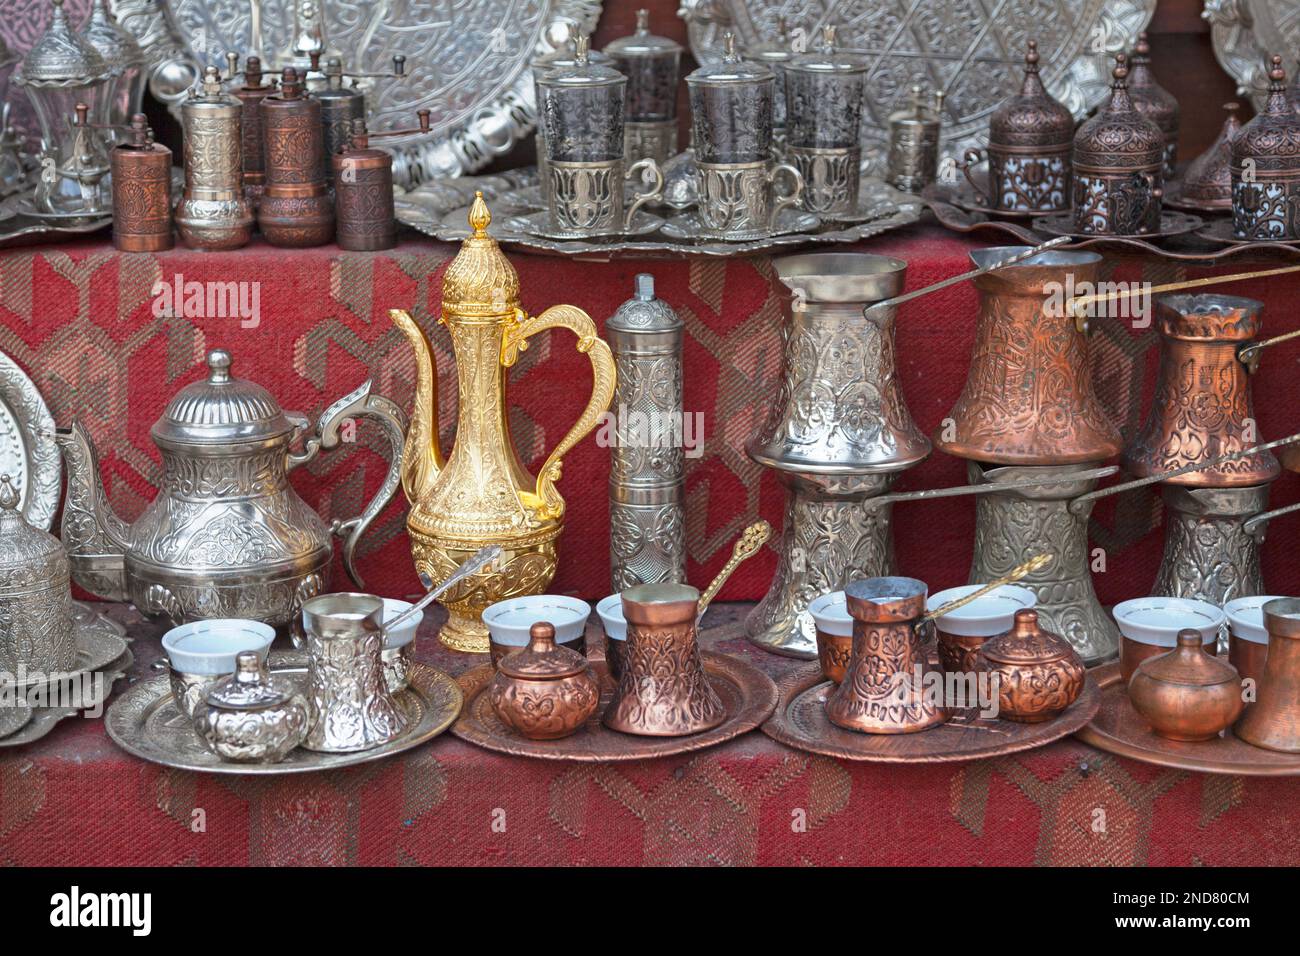 Traditional Ottoman coffee pots and tea pots for sale in the old bazaar of Sarajevo, Bosnia and Herzegovina. Stock Photo